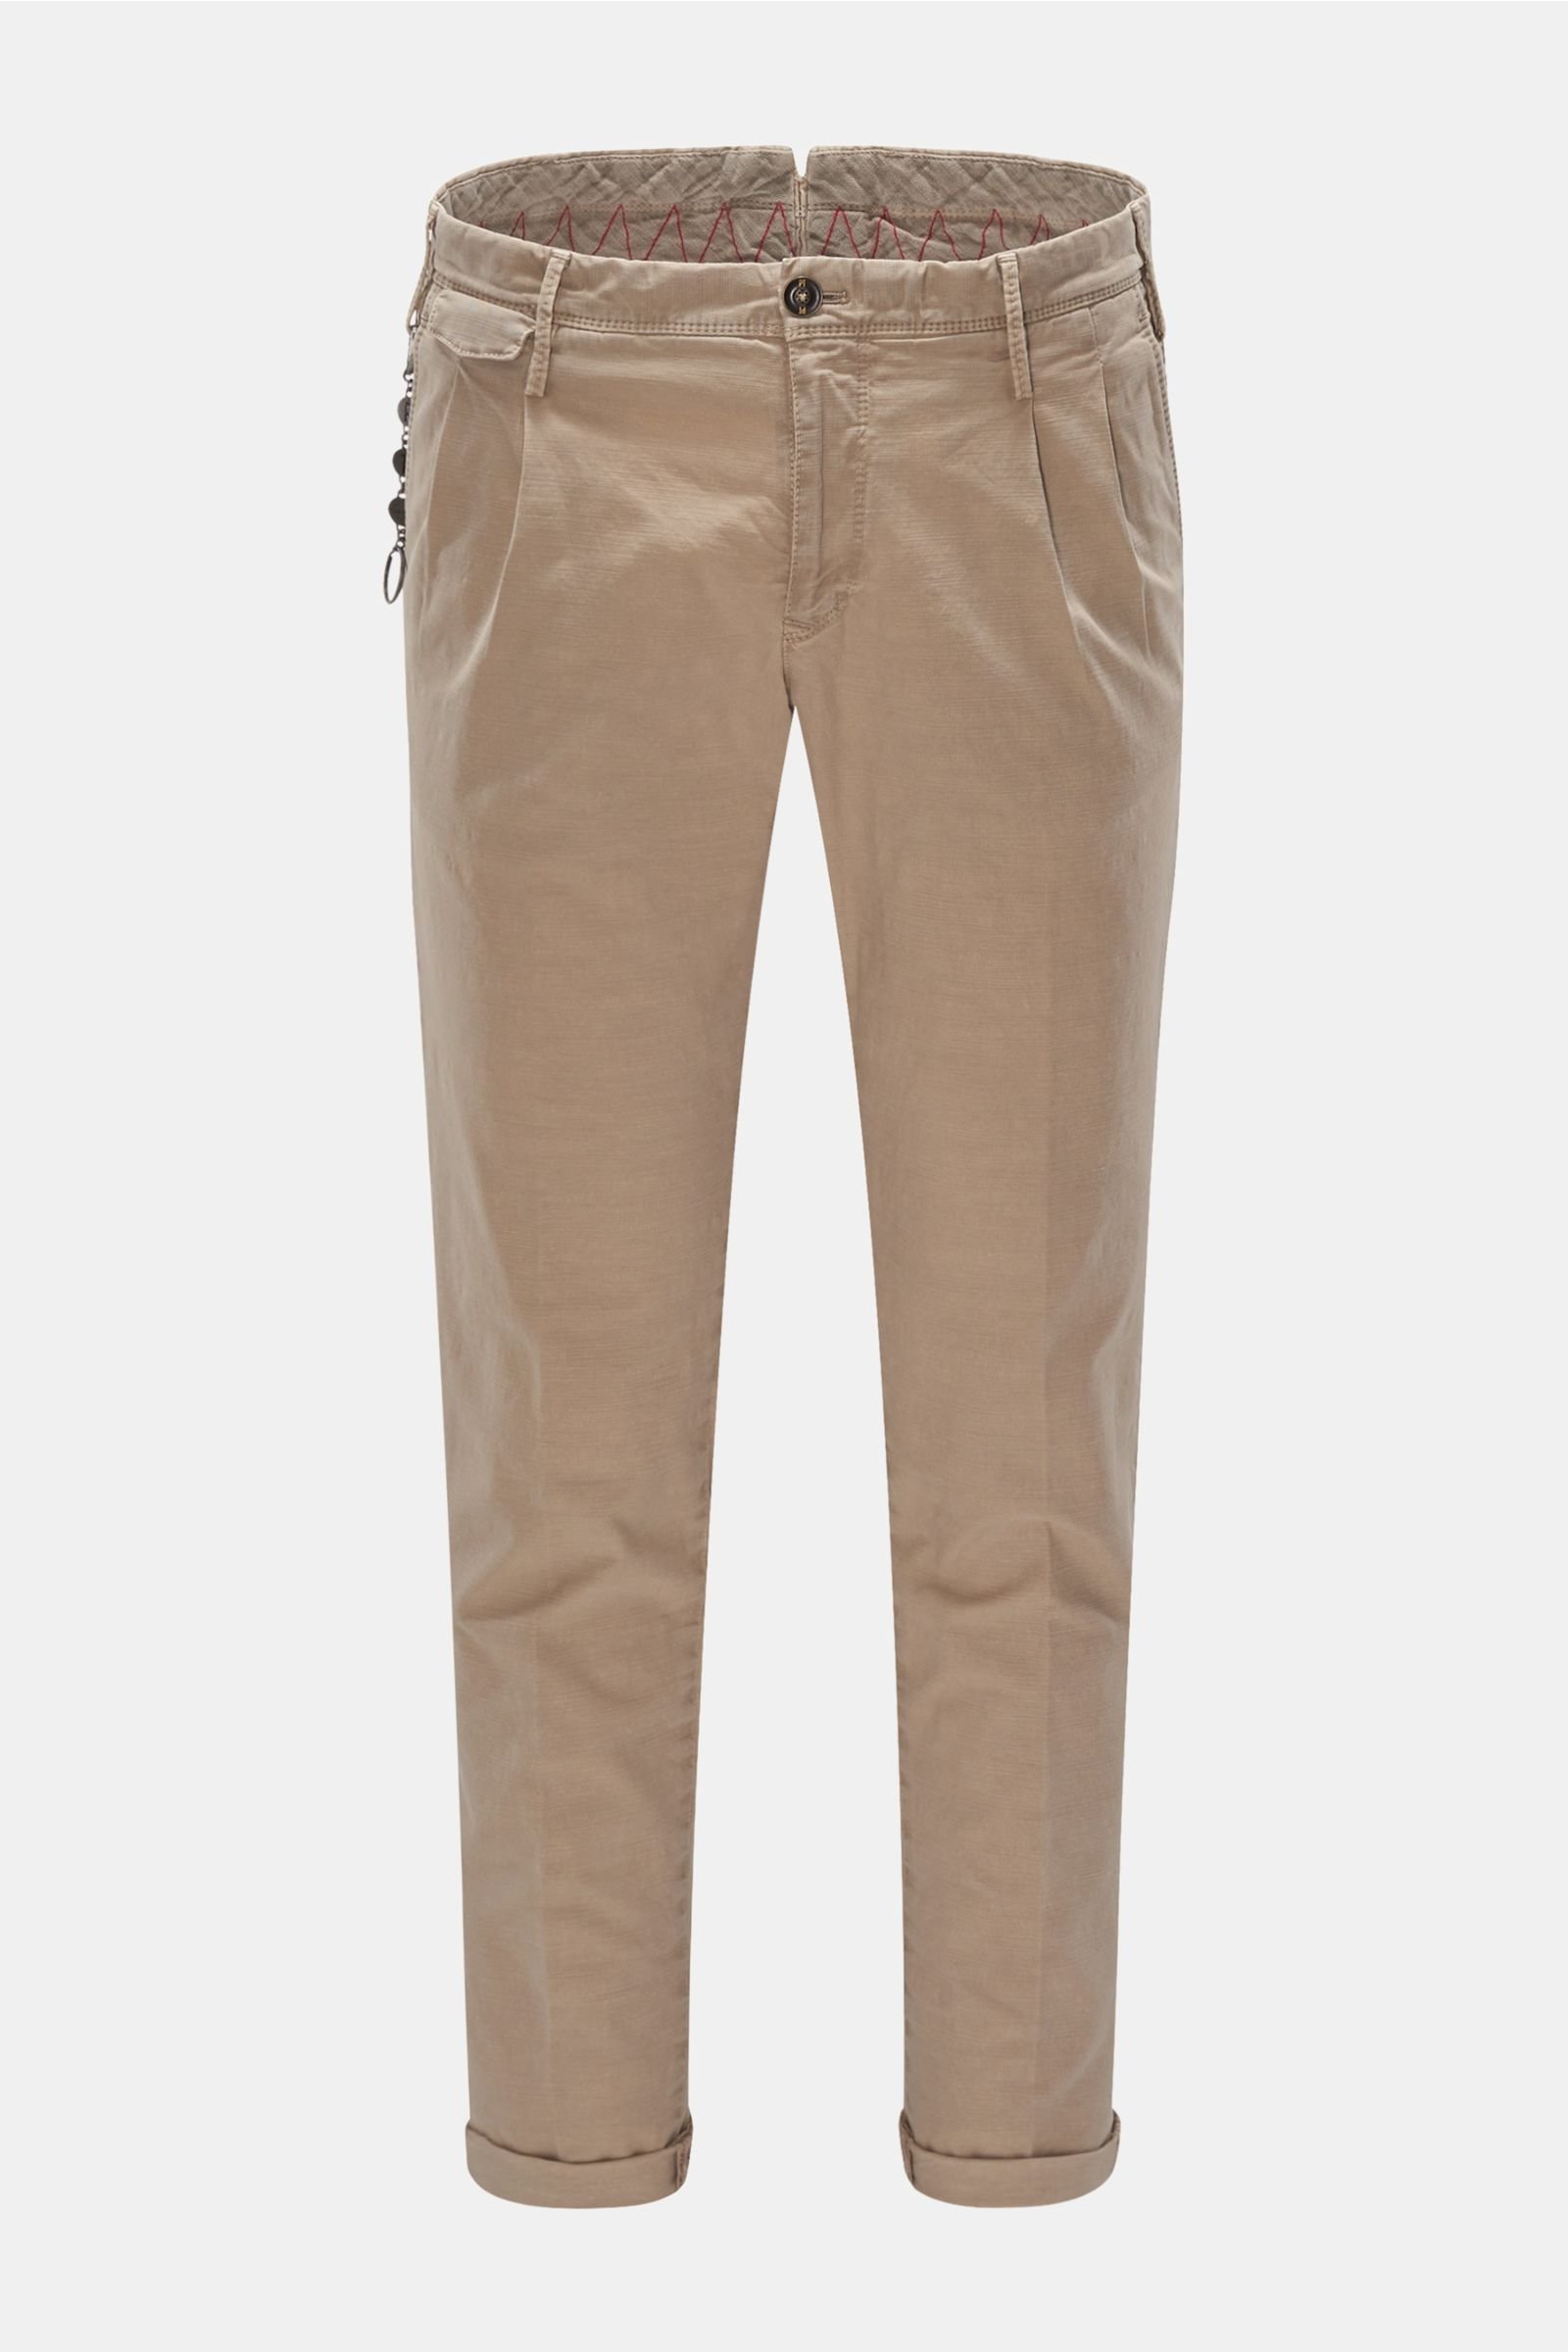 Cotton trousers 'Arial' light brown